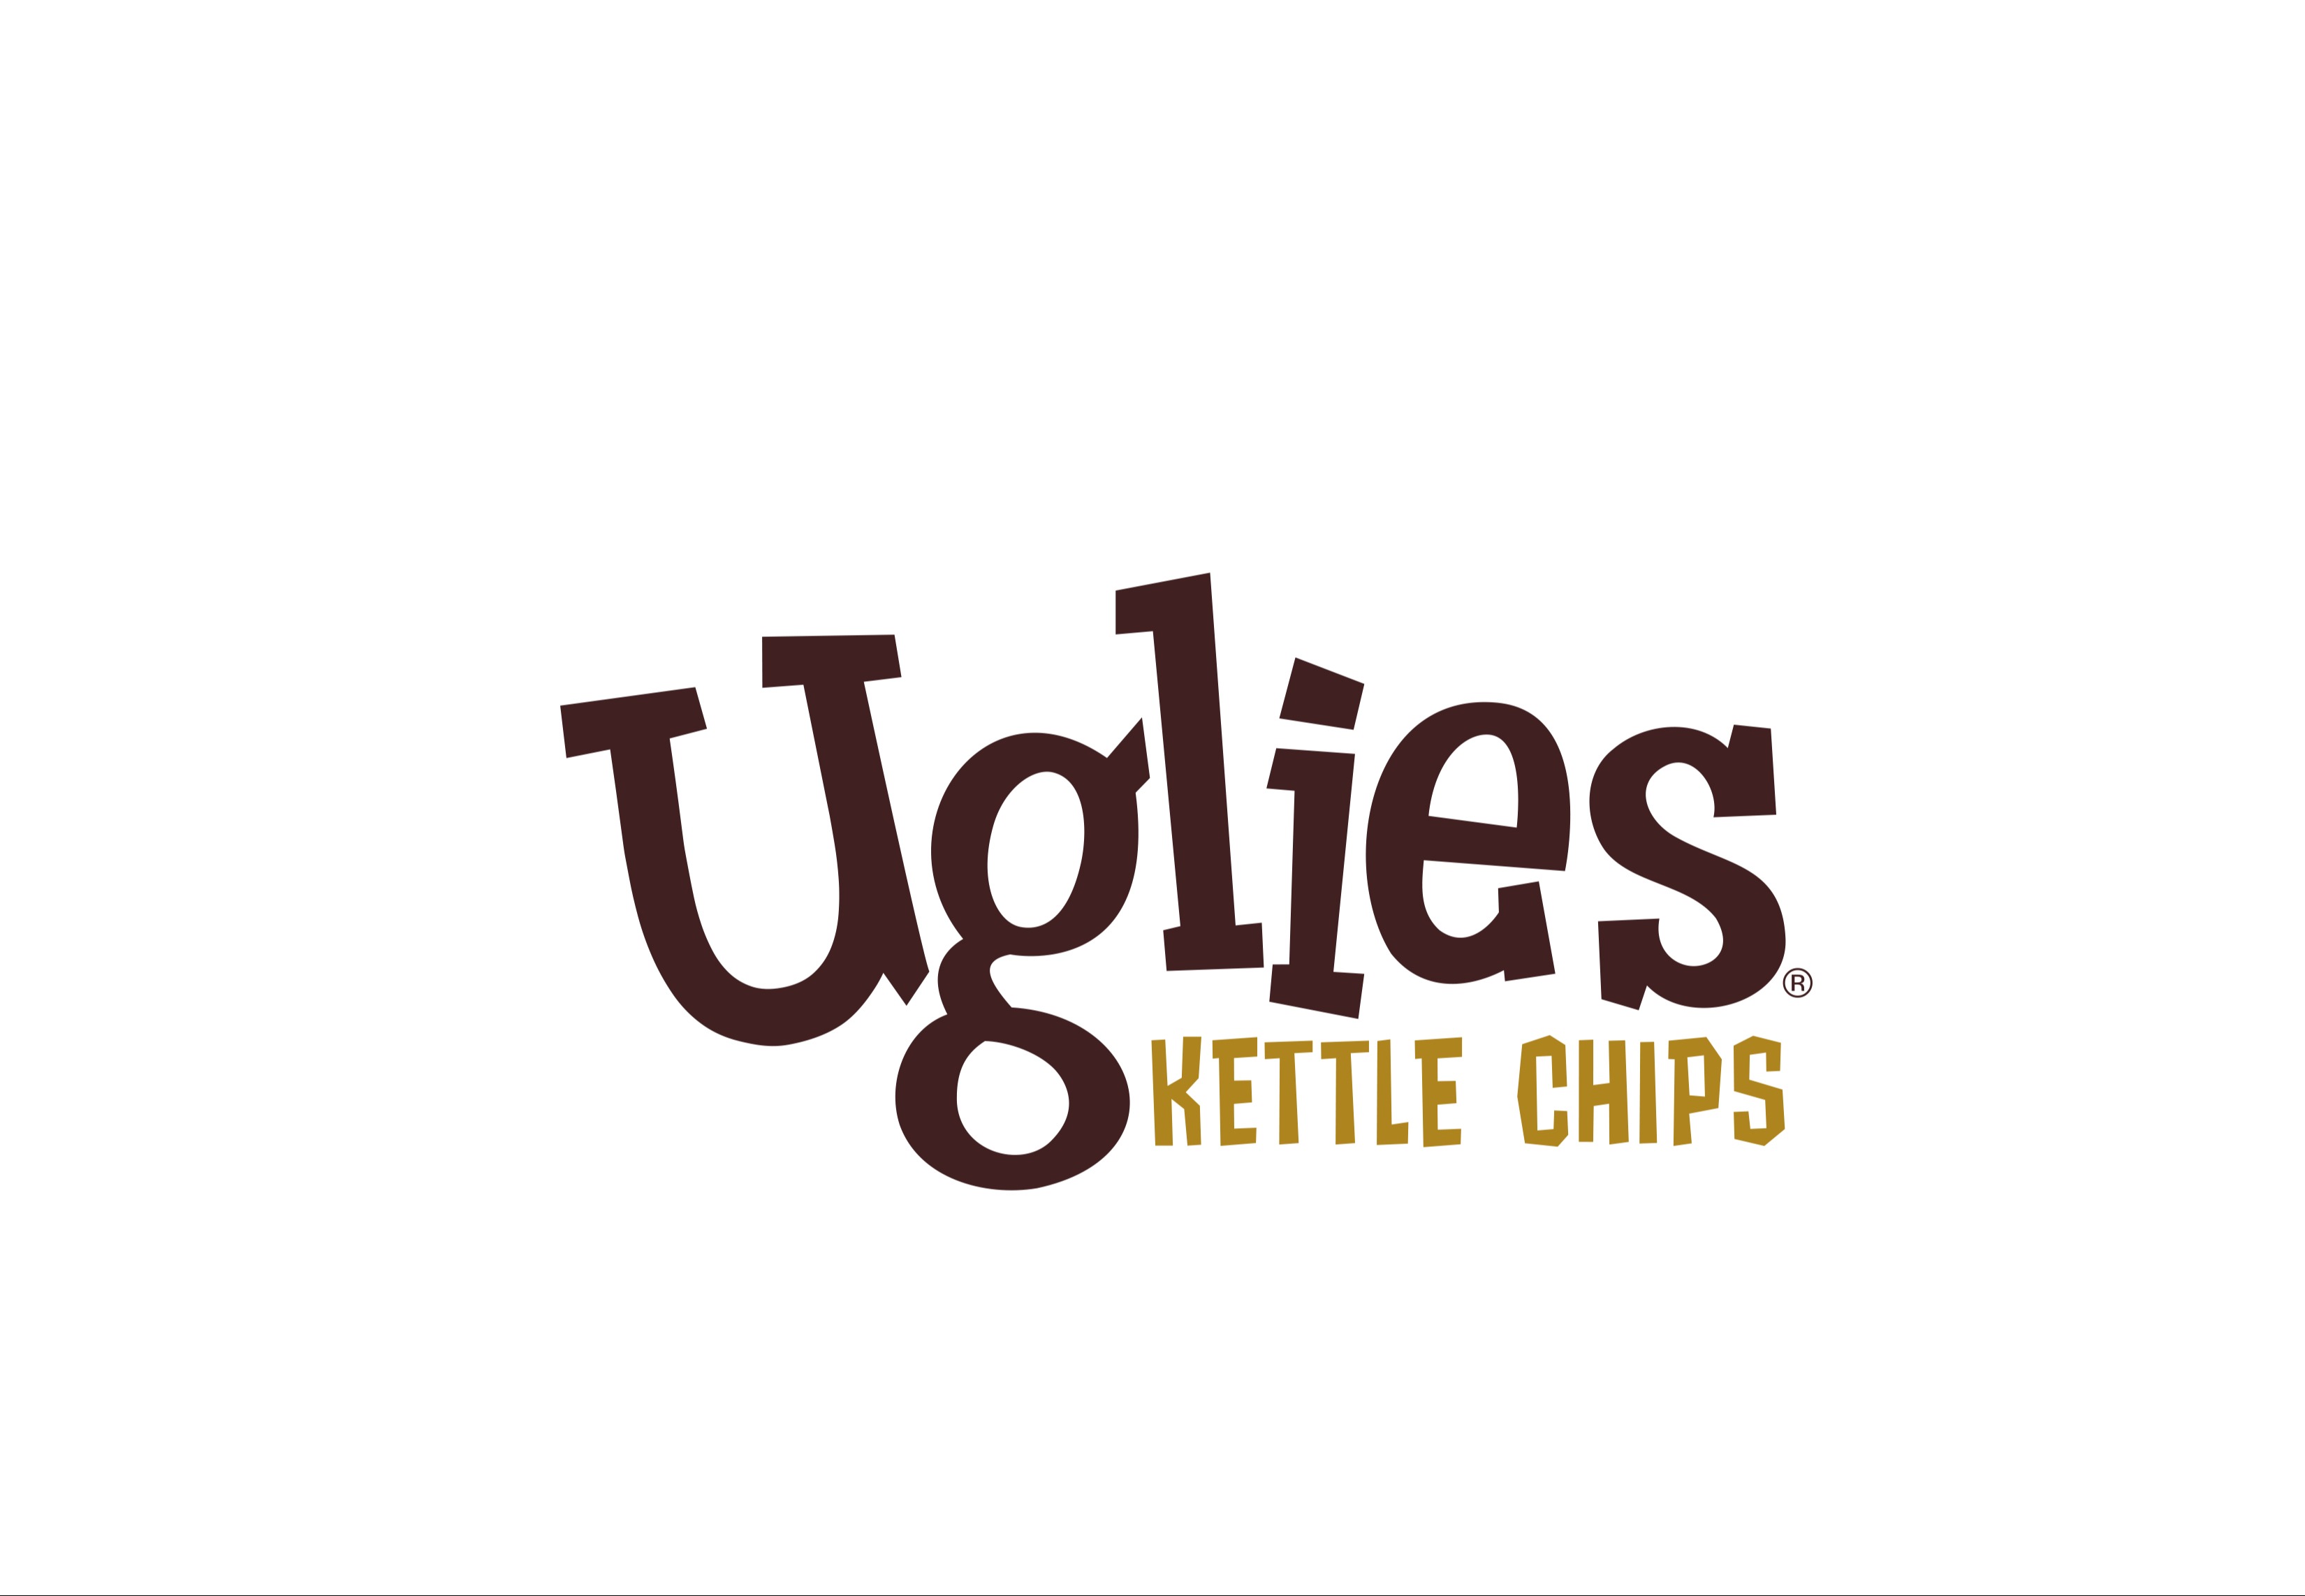 Upcycled Uglies Kettle Chips Rescues 25 Millionth Pound of “Ugly” Potatoes 118